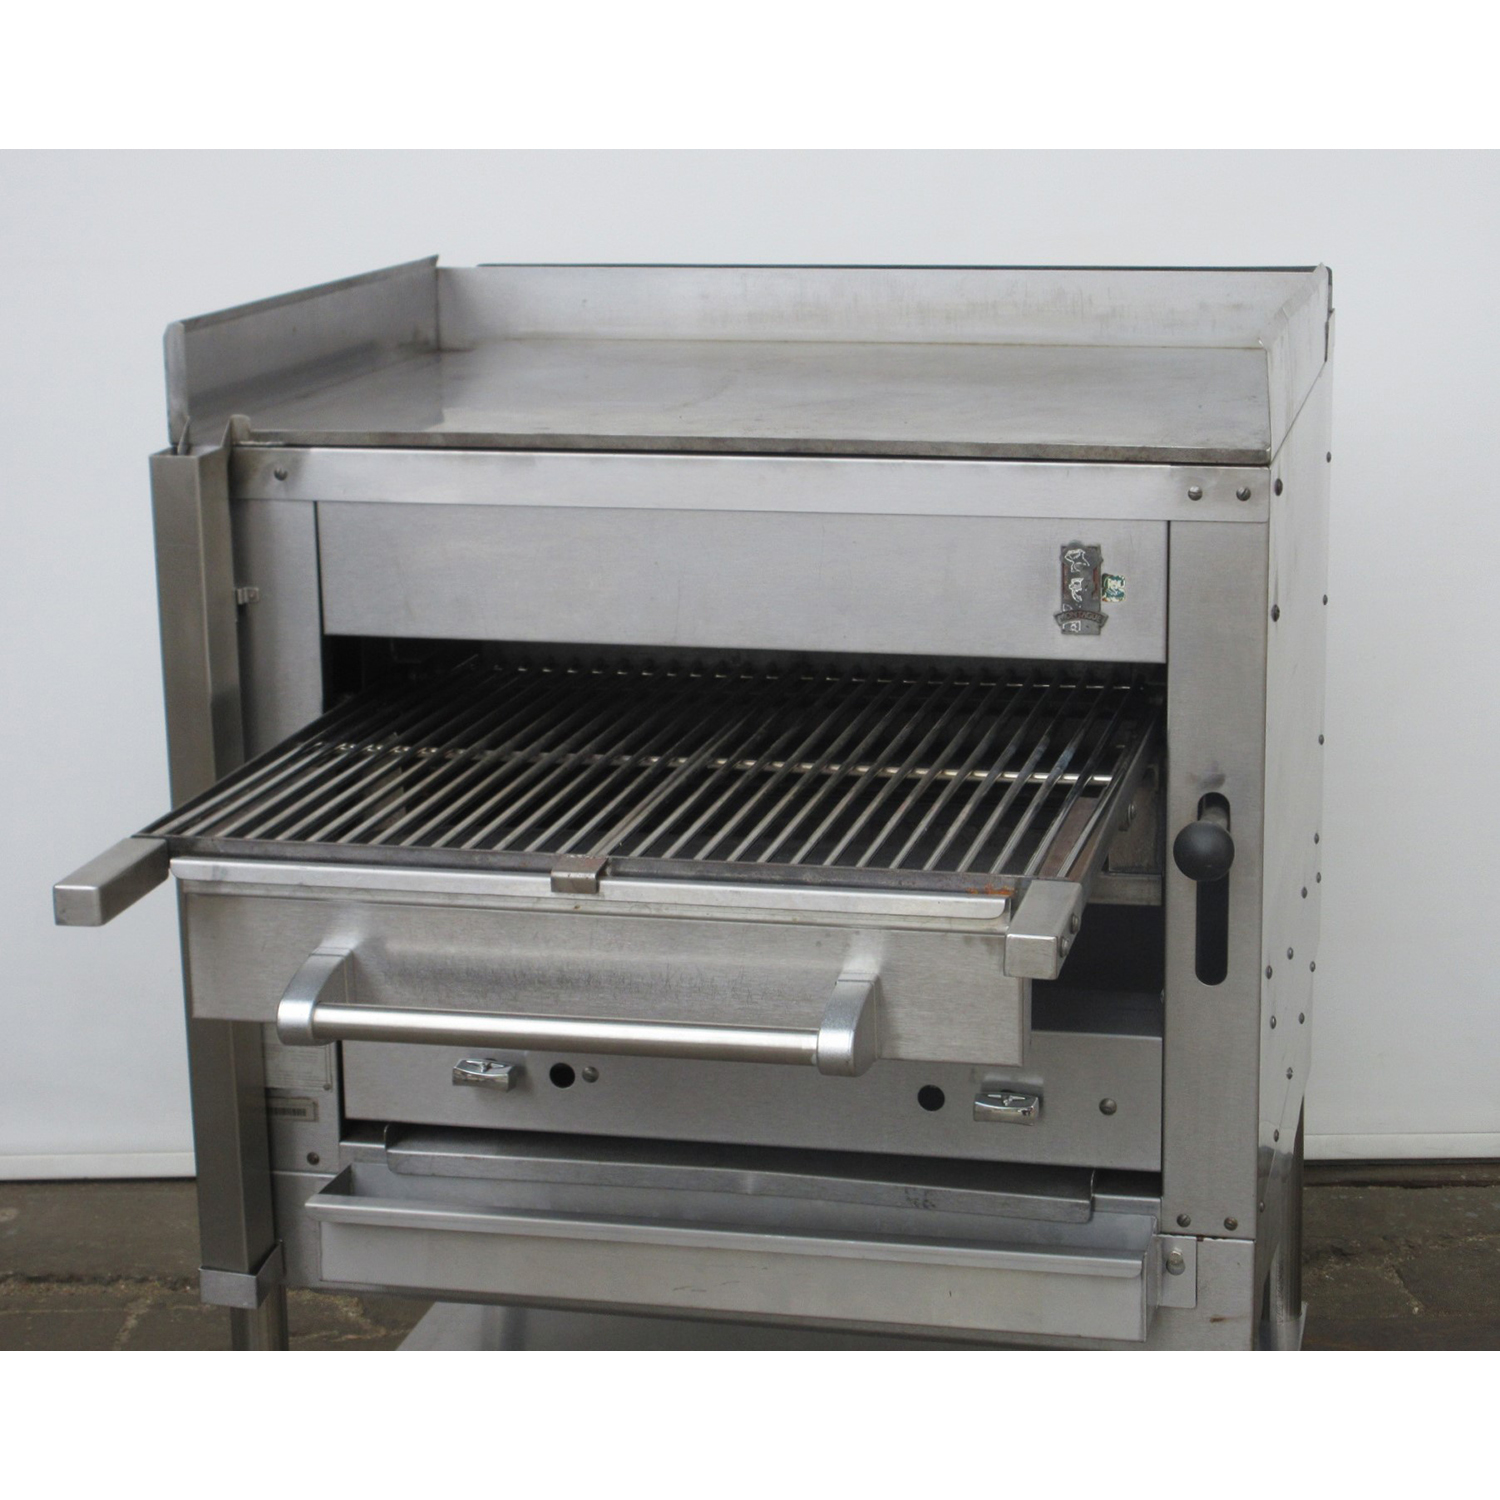 Montague C36SHB Radiglo Steakhouse Gas Broiler 36", Used Excellent Condition image 1